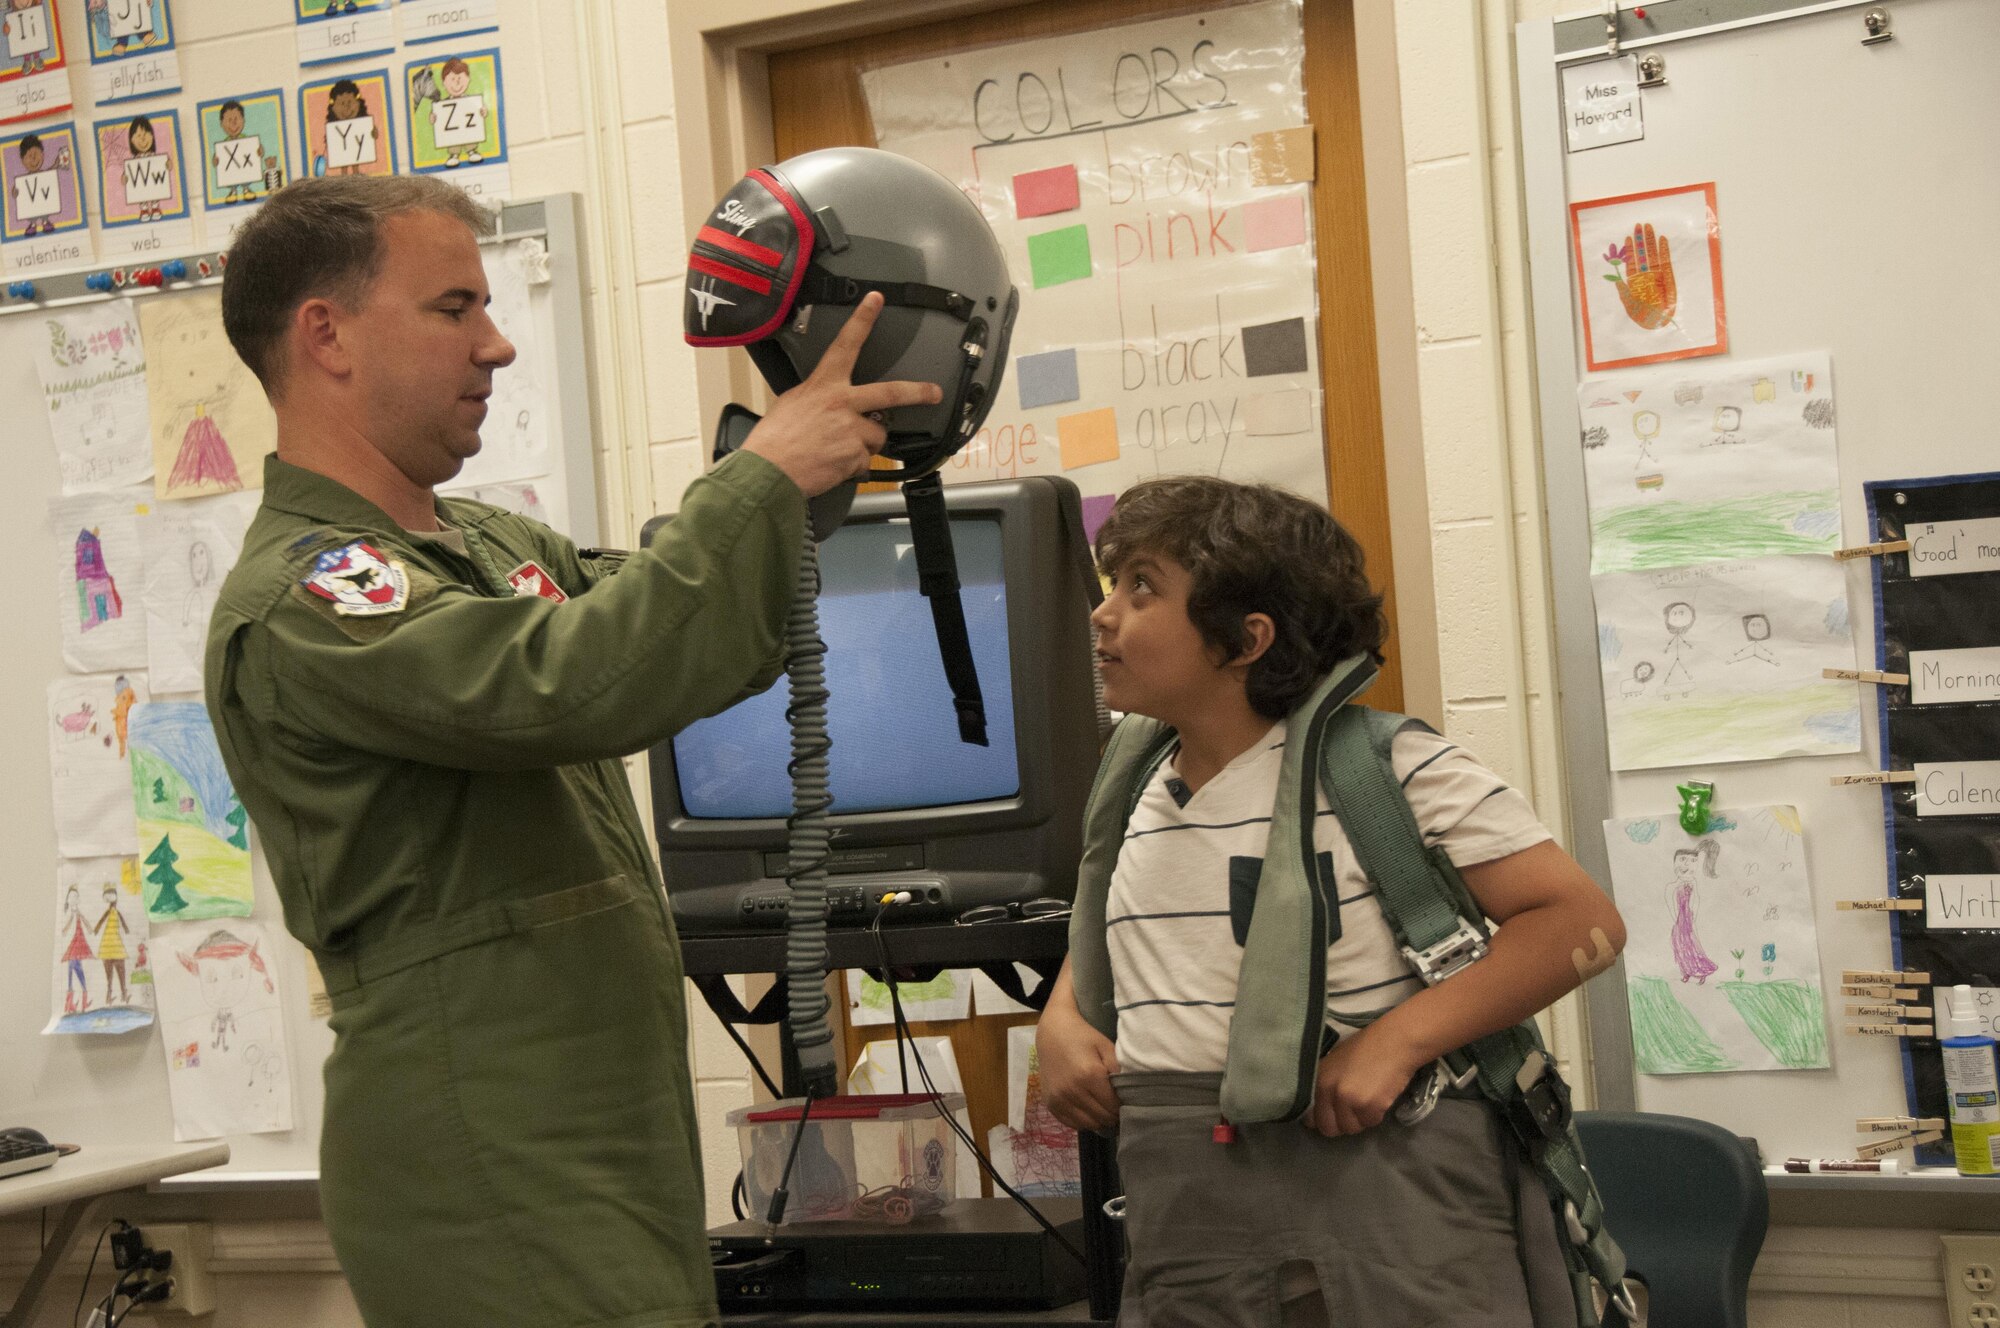 Col. Tom Bladen, 104th Fighter Wing operations group commander, visits refugee students at Highland Elementary School in Westfield, Massachusetts, June 26, 2017. The visit served as a means to help the children understand why they hear the loud screeching F15 jets flying overhead when playing outside and to help them understand the 104th Fighter Wing flies to protect. Bladen helps the honoree pilot of the day dawn a 104th Fighter Wing flight suit. (U.S. Air National Guard photo by Senior Master Sgt. Julie Avey)